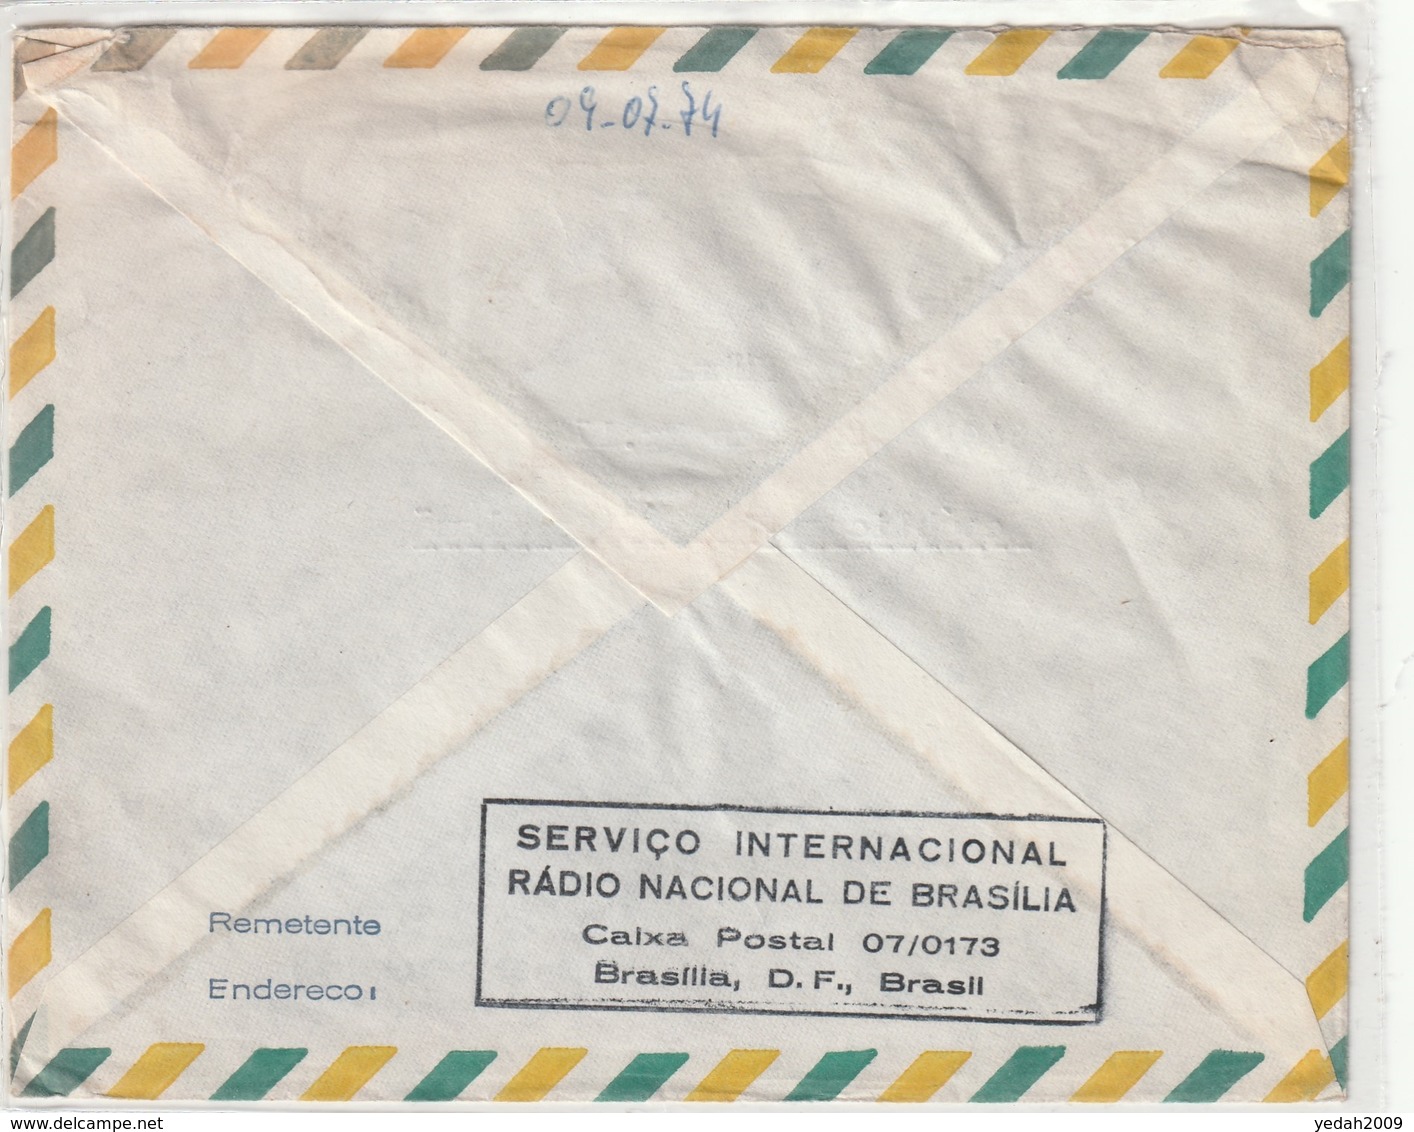 Brazil TV AND RADIO METER STAMP AIRMAIL COVER TO Germany 1974 - Luftpost